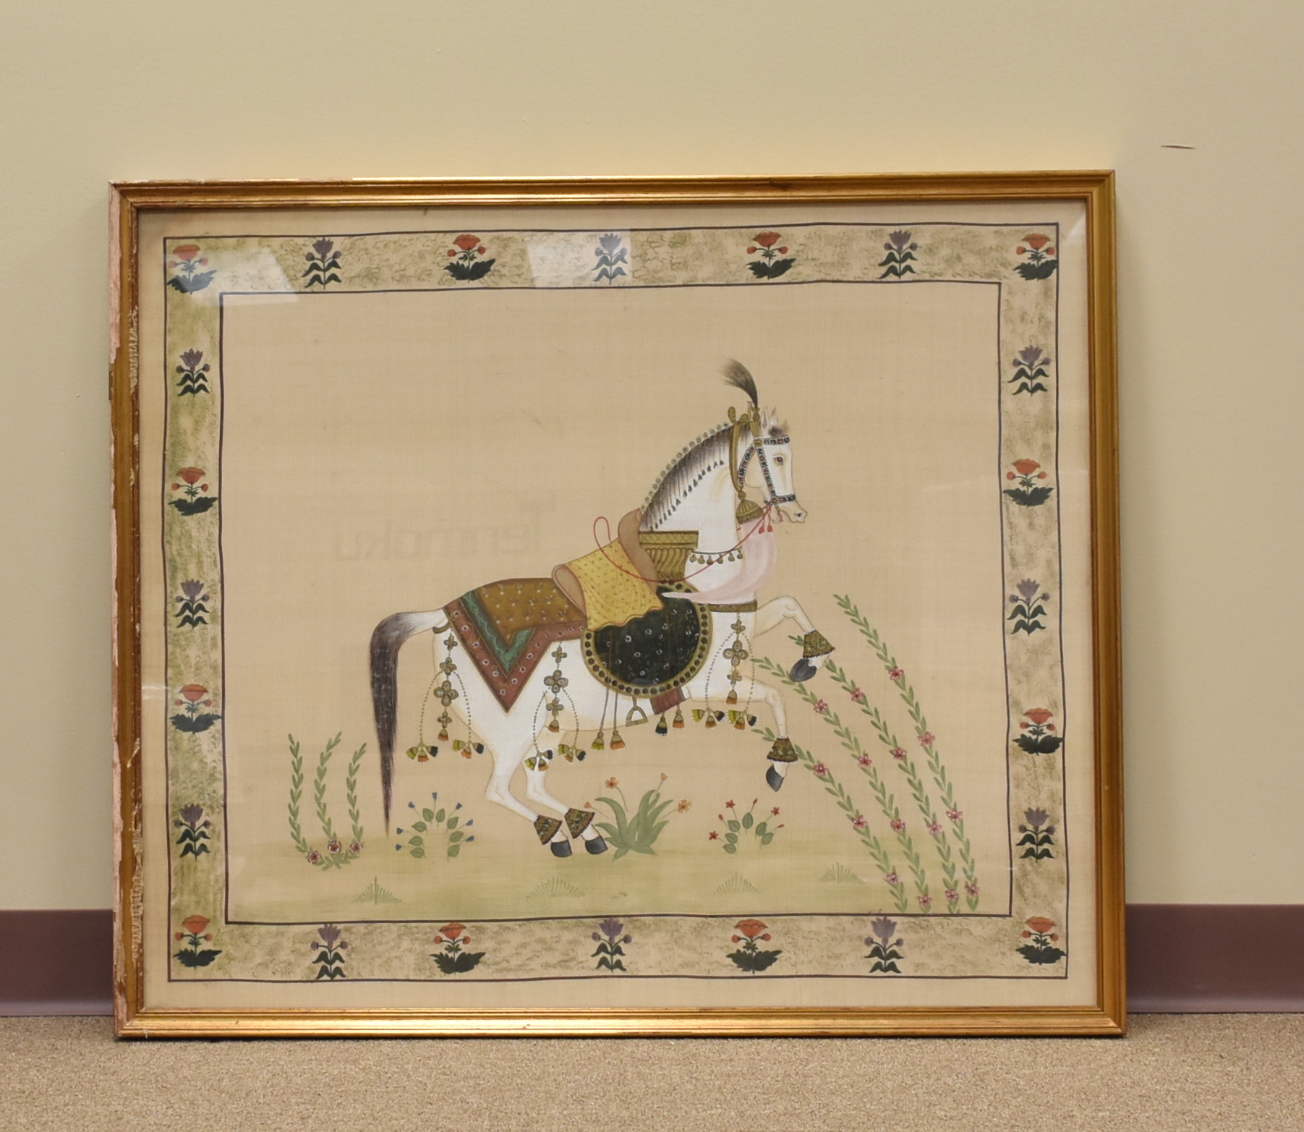 FRAMED PAINTING ON SILK, WITH HORSE